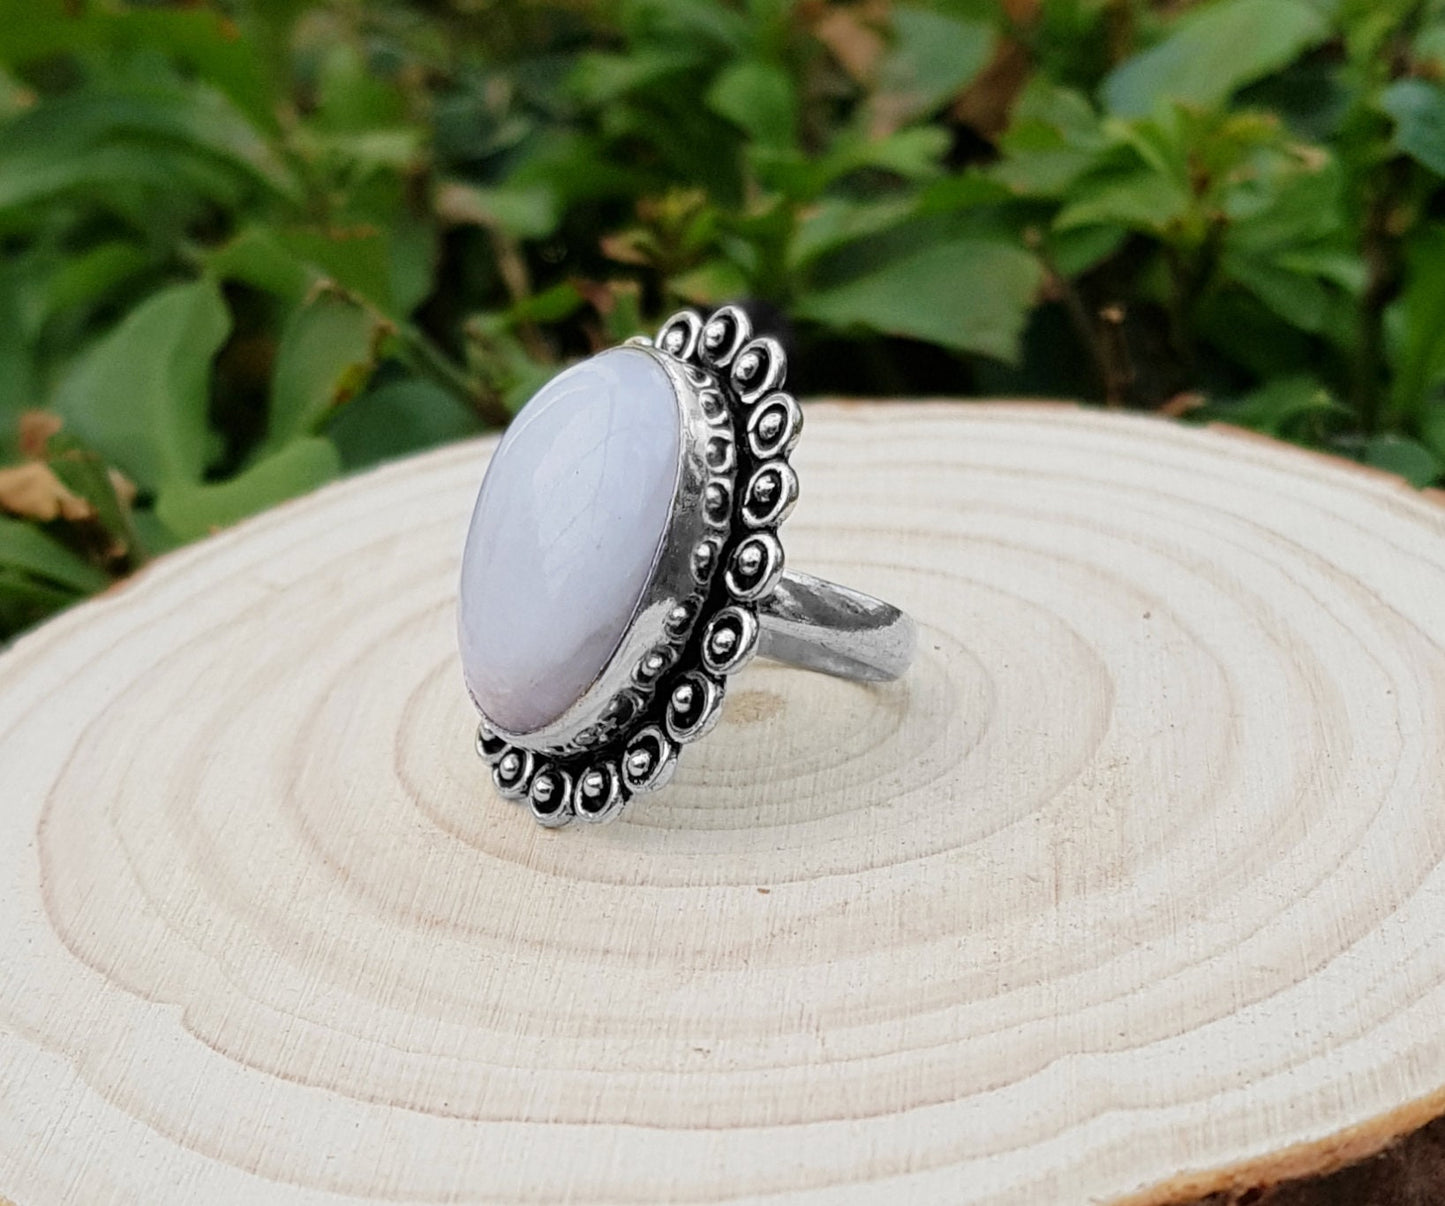 Rainbow Moonstone Sterling Silver Ring Size US 7 1/2 Statement Ring Unique Gift For Her Boho Rings Ethnic Ring GypsyJewelry Geometric Ring